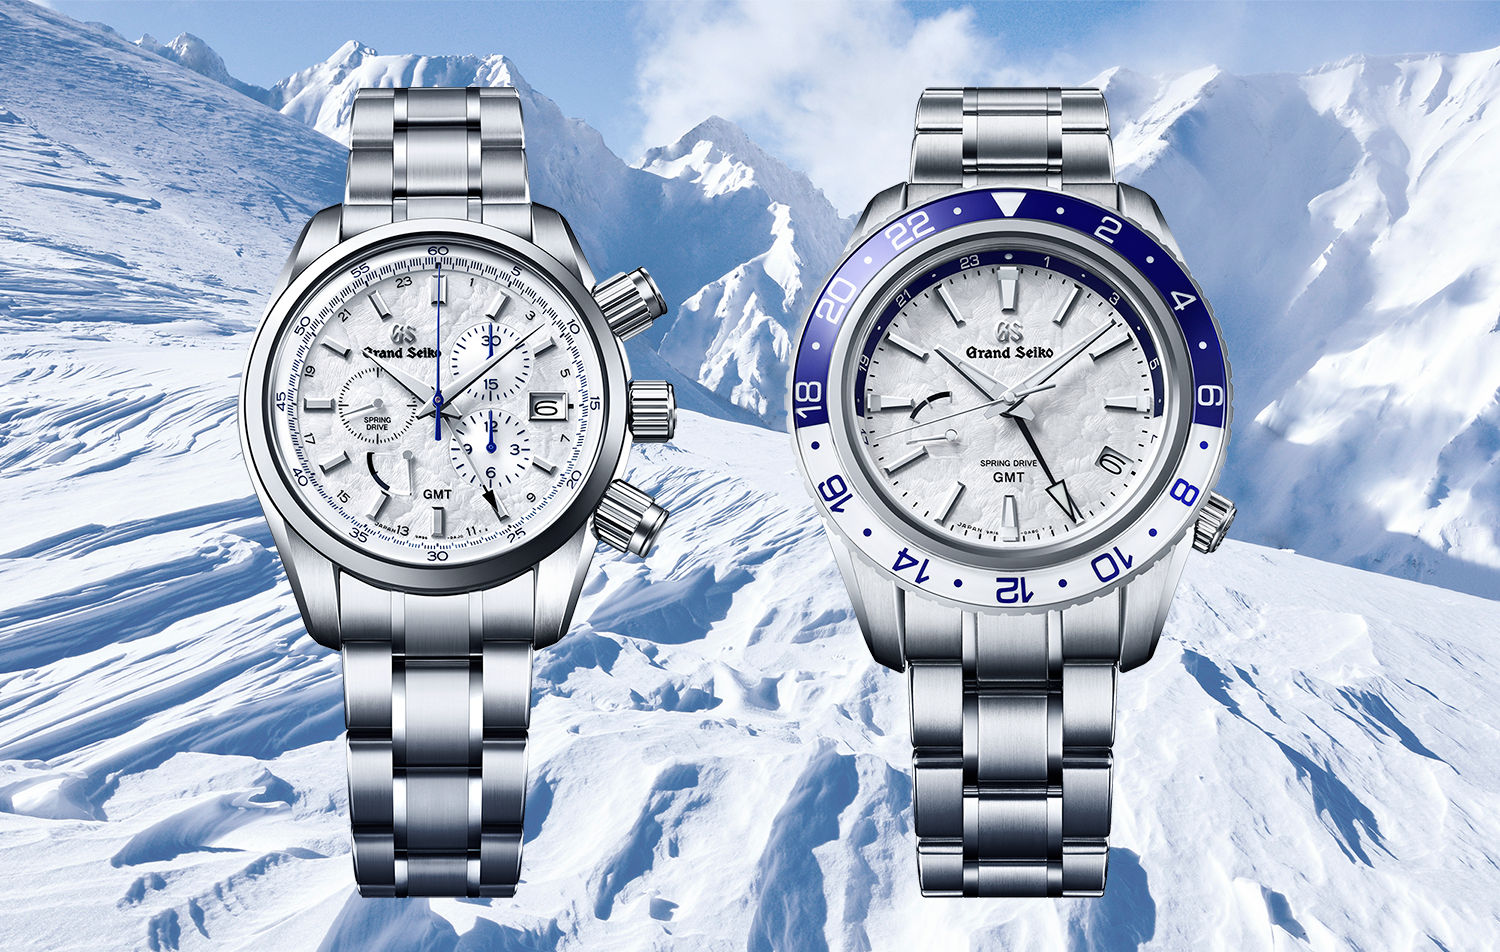 Grand Seiko Unveils Limited Edition Watches Inspired by Shinshu Winters